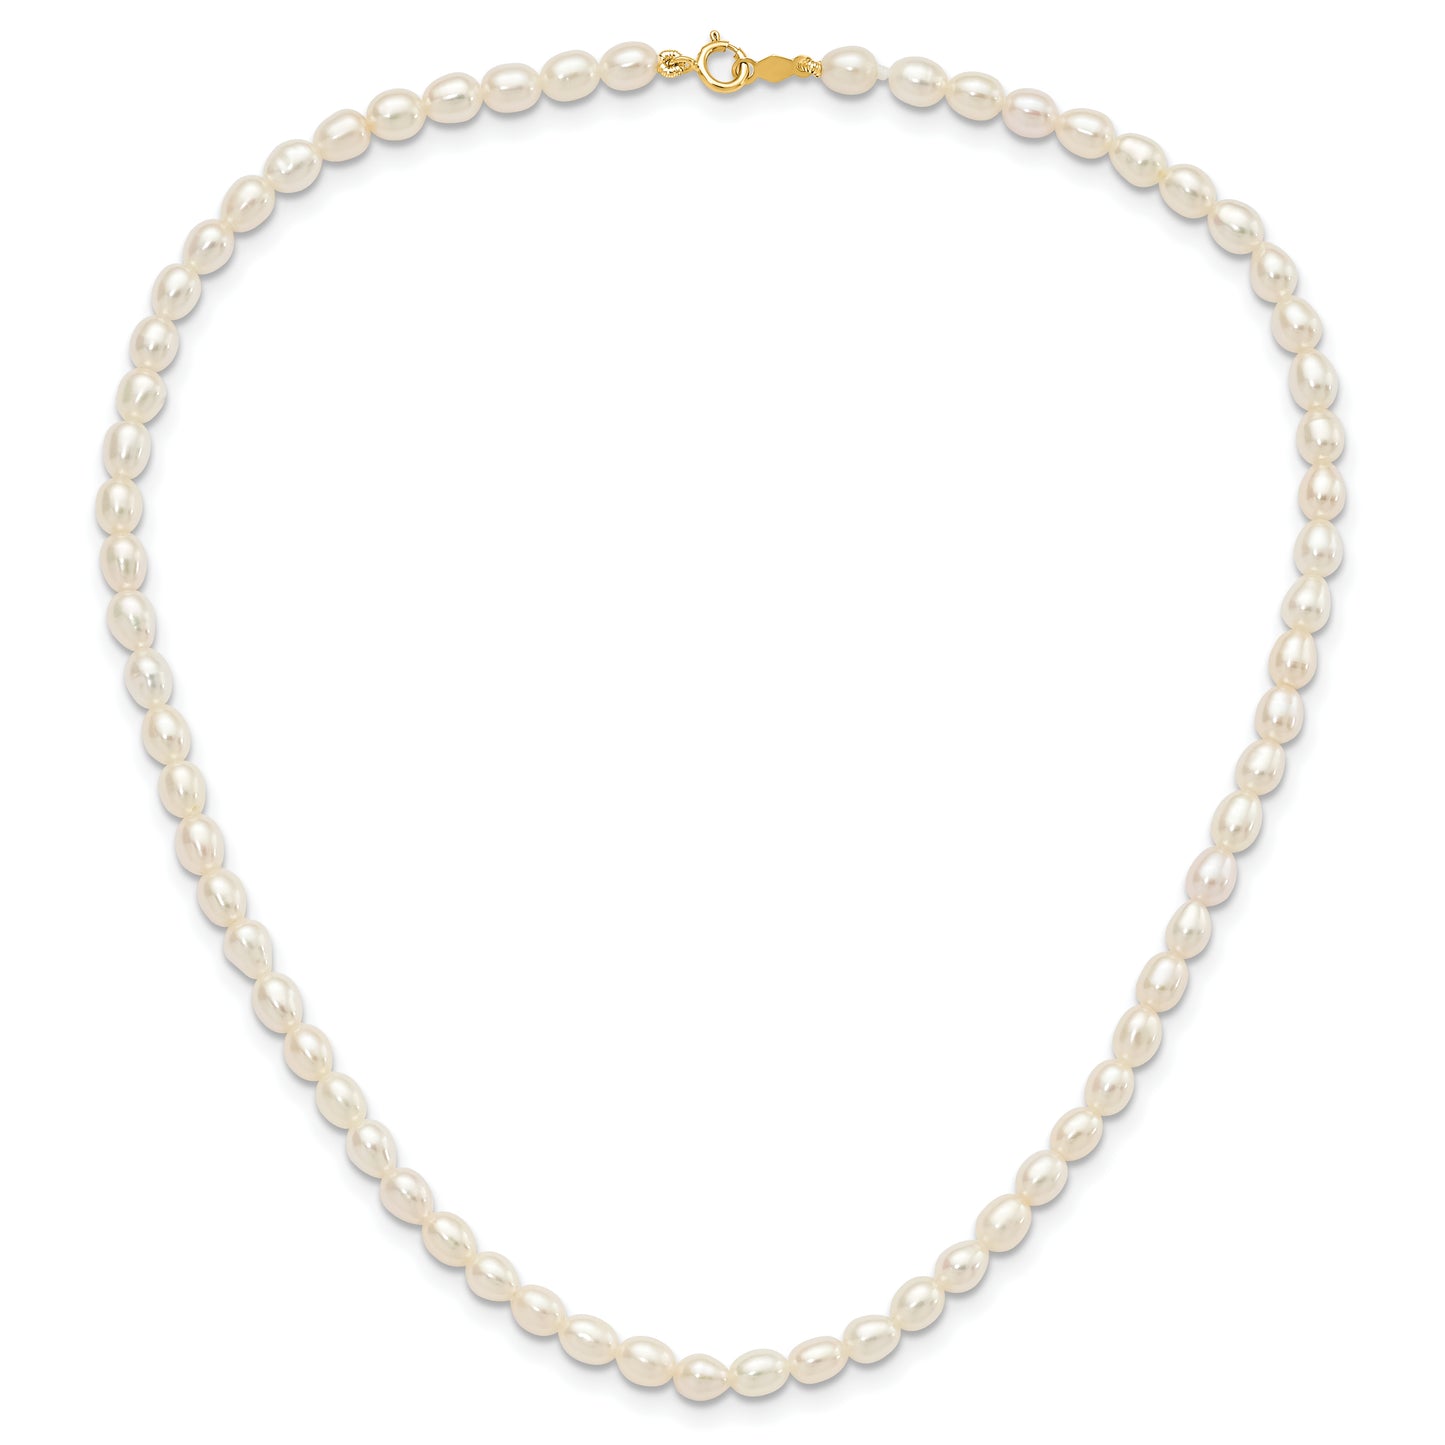 14k White FW Cultured Pearl 14 in. Necklace, 5 in. Bracelet and Earring Set